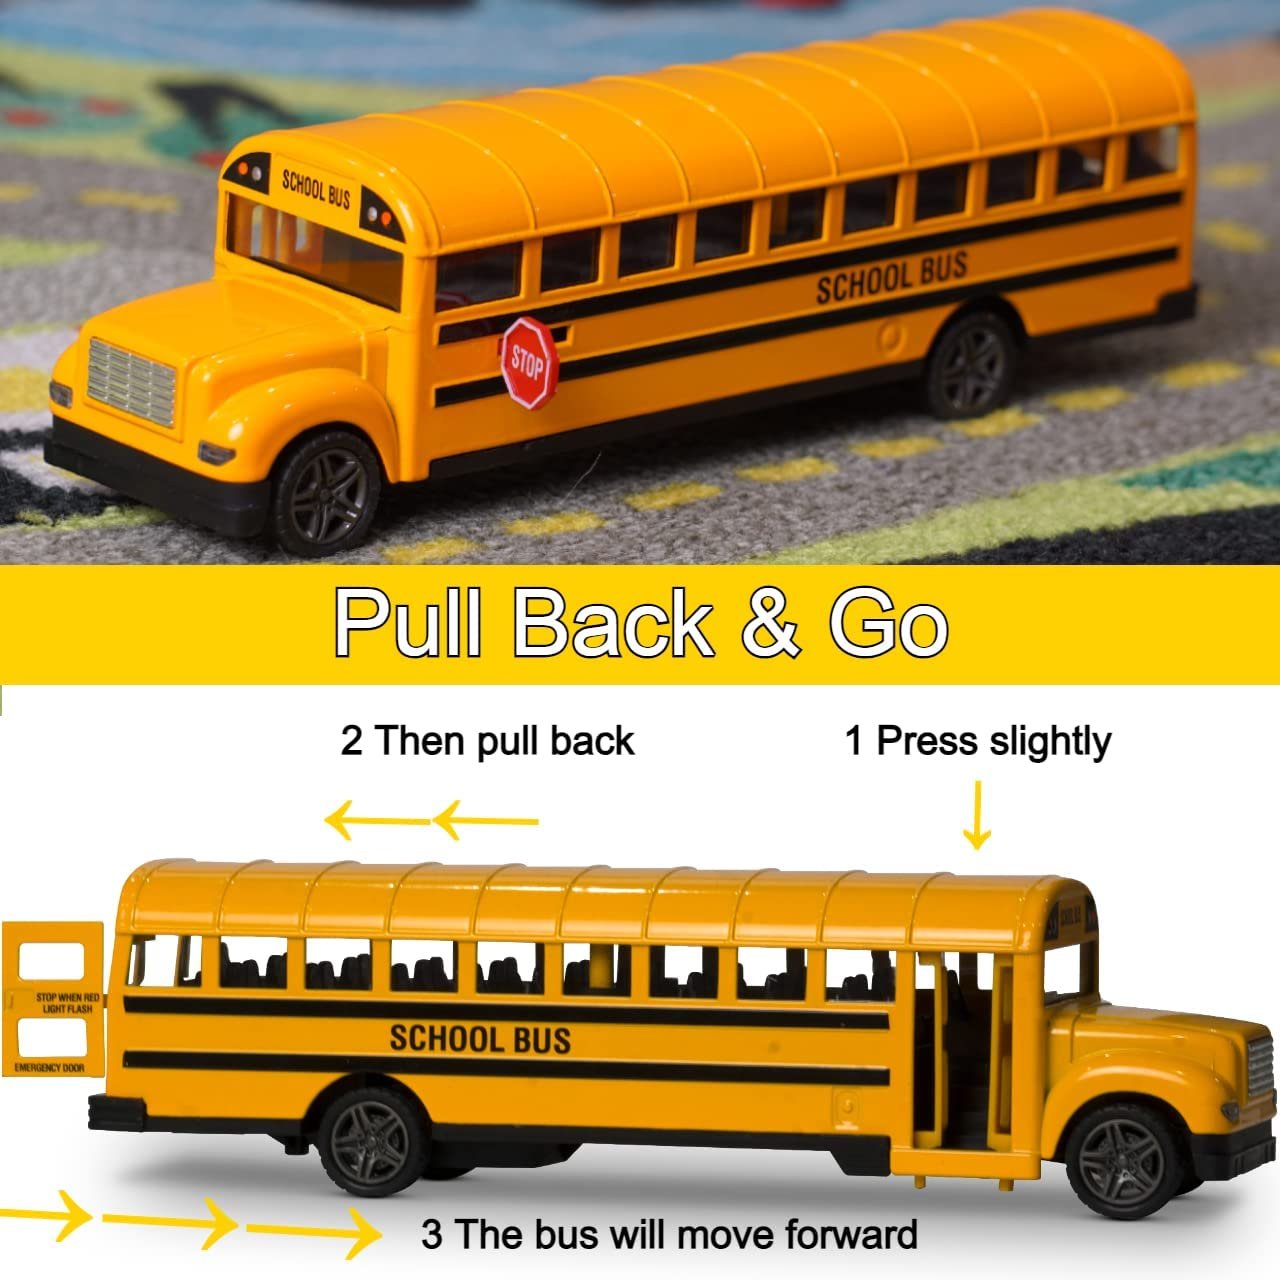 Diecast Yellow School Bus Toy for Kids - 8.5" Pull Back Car with Cool Opening Doors and Rubber Tires - Durable Diecast Metal - Best Birthday for Boys and Girls